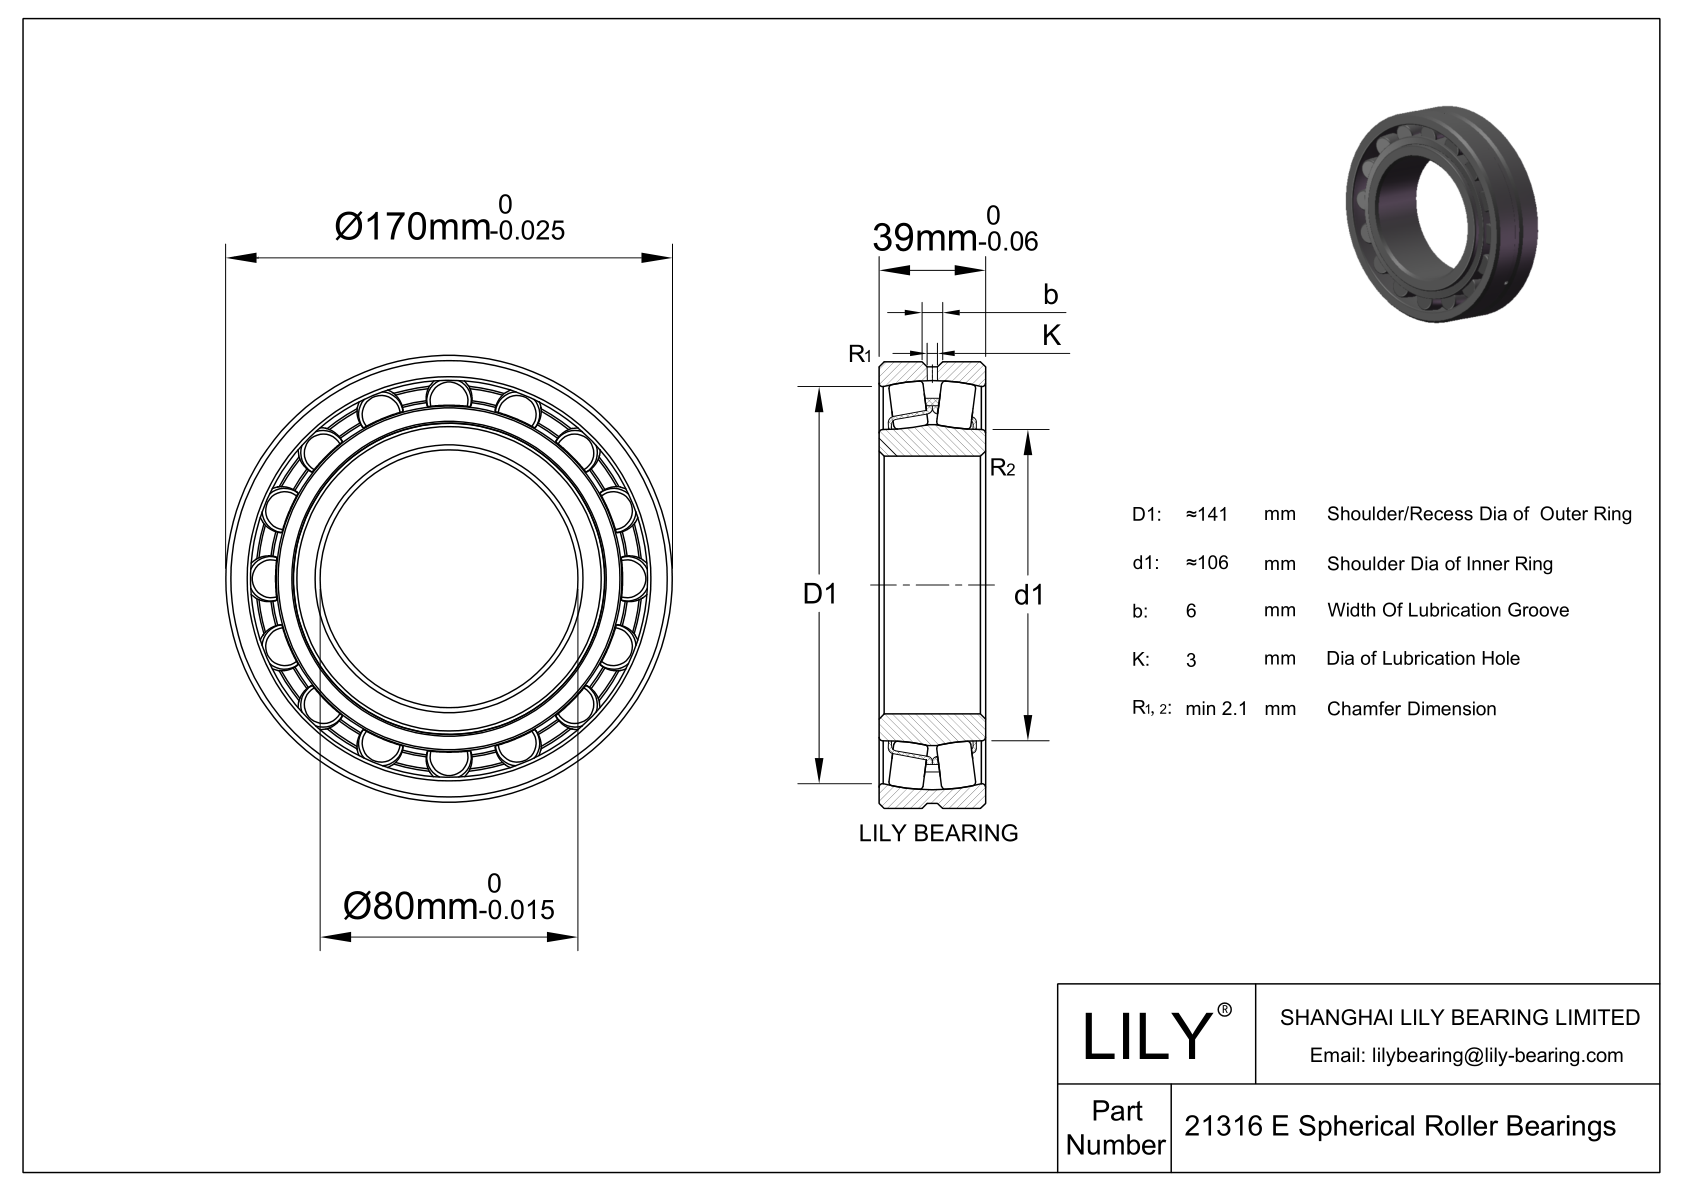 21316 E Double Row Spherical Roller Bearing cad drawing